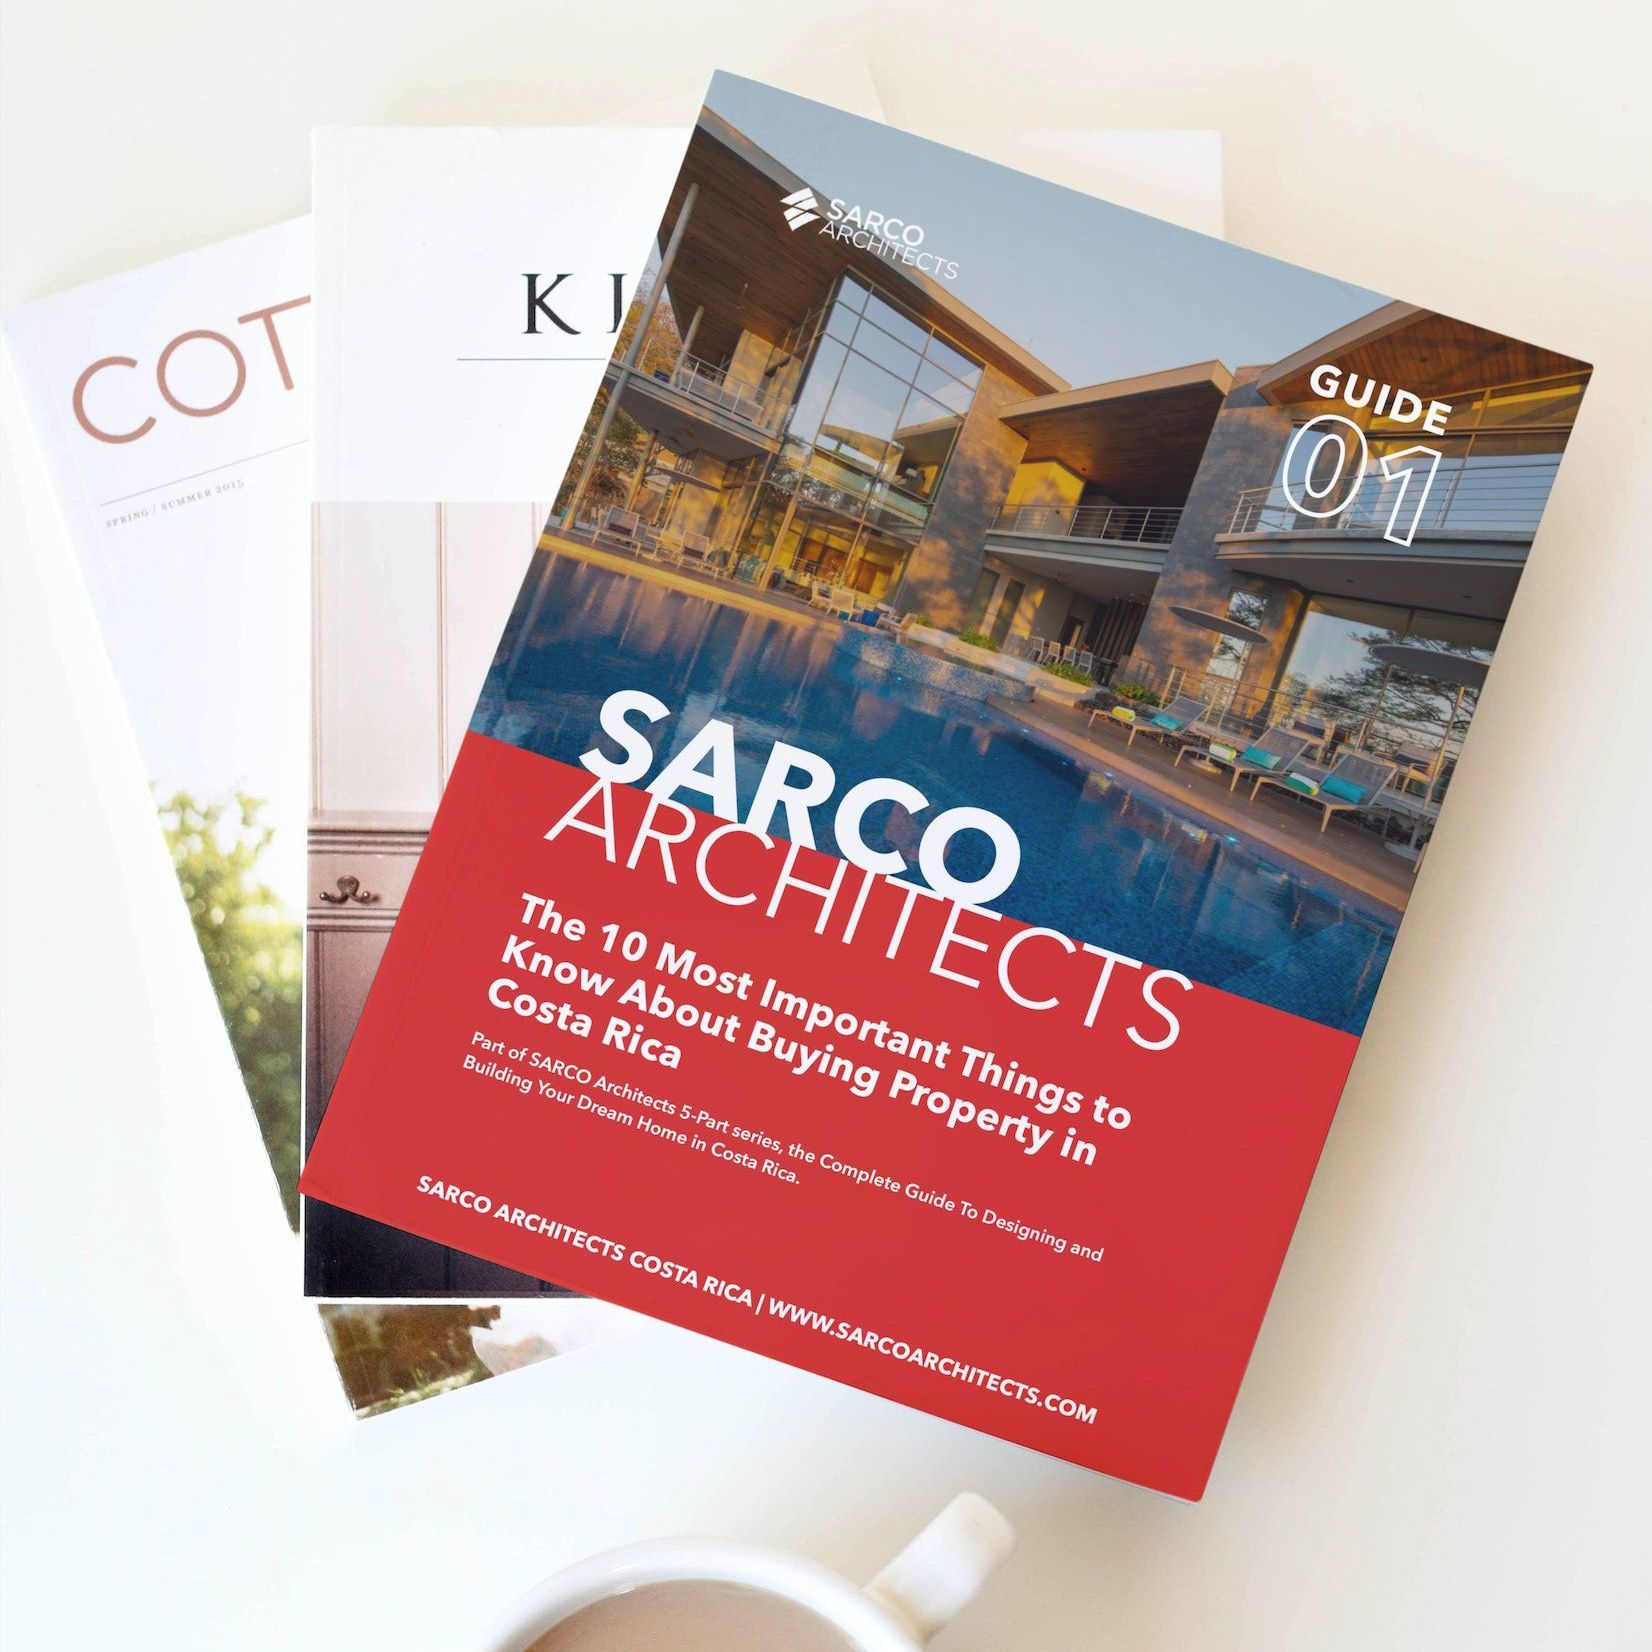 cover of sarco architects guide to the 10 most important things to know about buying property in costa rica